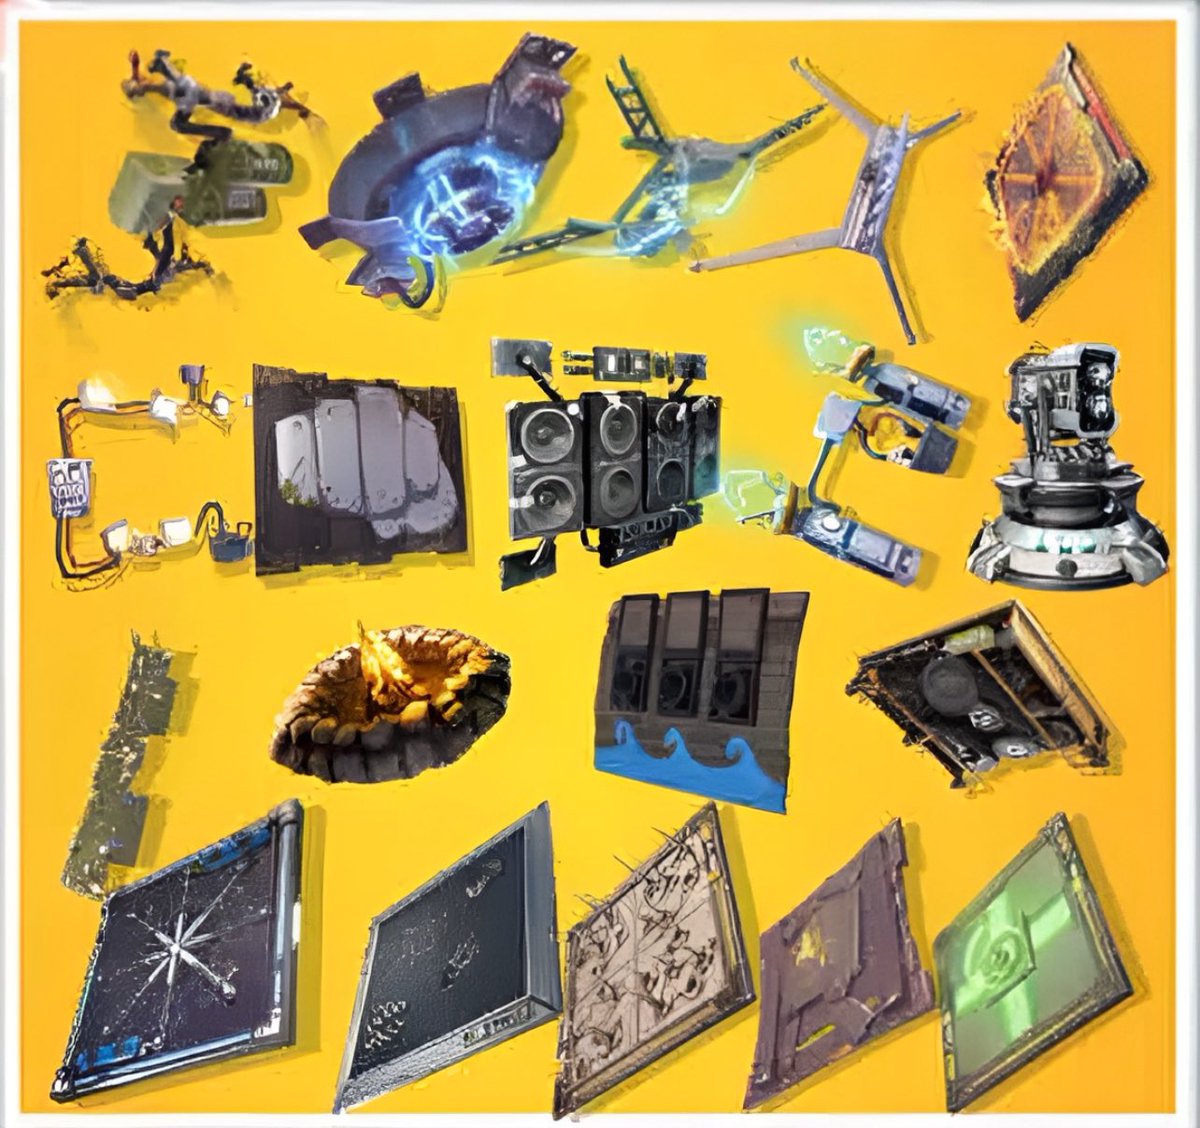 #GiveawayAlert💢
5k Traps 144PL enter to have a chance to win #Fortnite STW trap
(1 Winners) 

Ends after 5 min

1-Follow @krch852 & @KyuubiHowie & @XenRz_ for what he is doing 🔥. 
2-Tag 1 friend
3-Add #KrchGiveaway

~X is not affiliated with nor responsible for this giveaway~